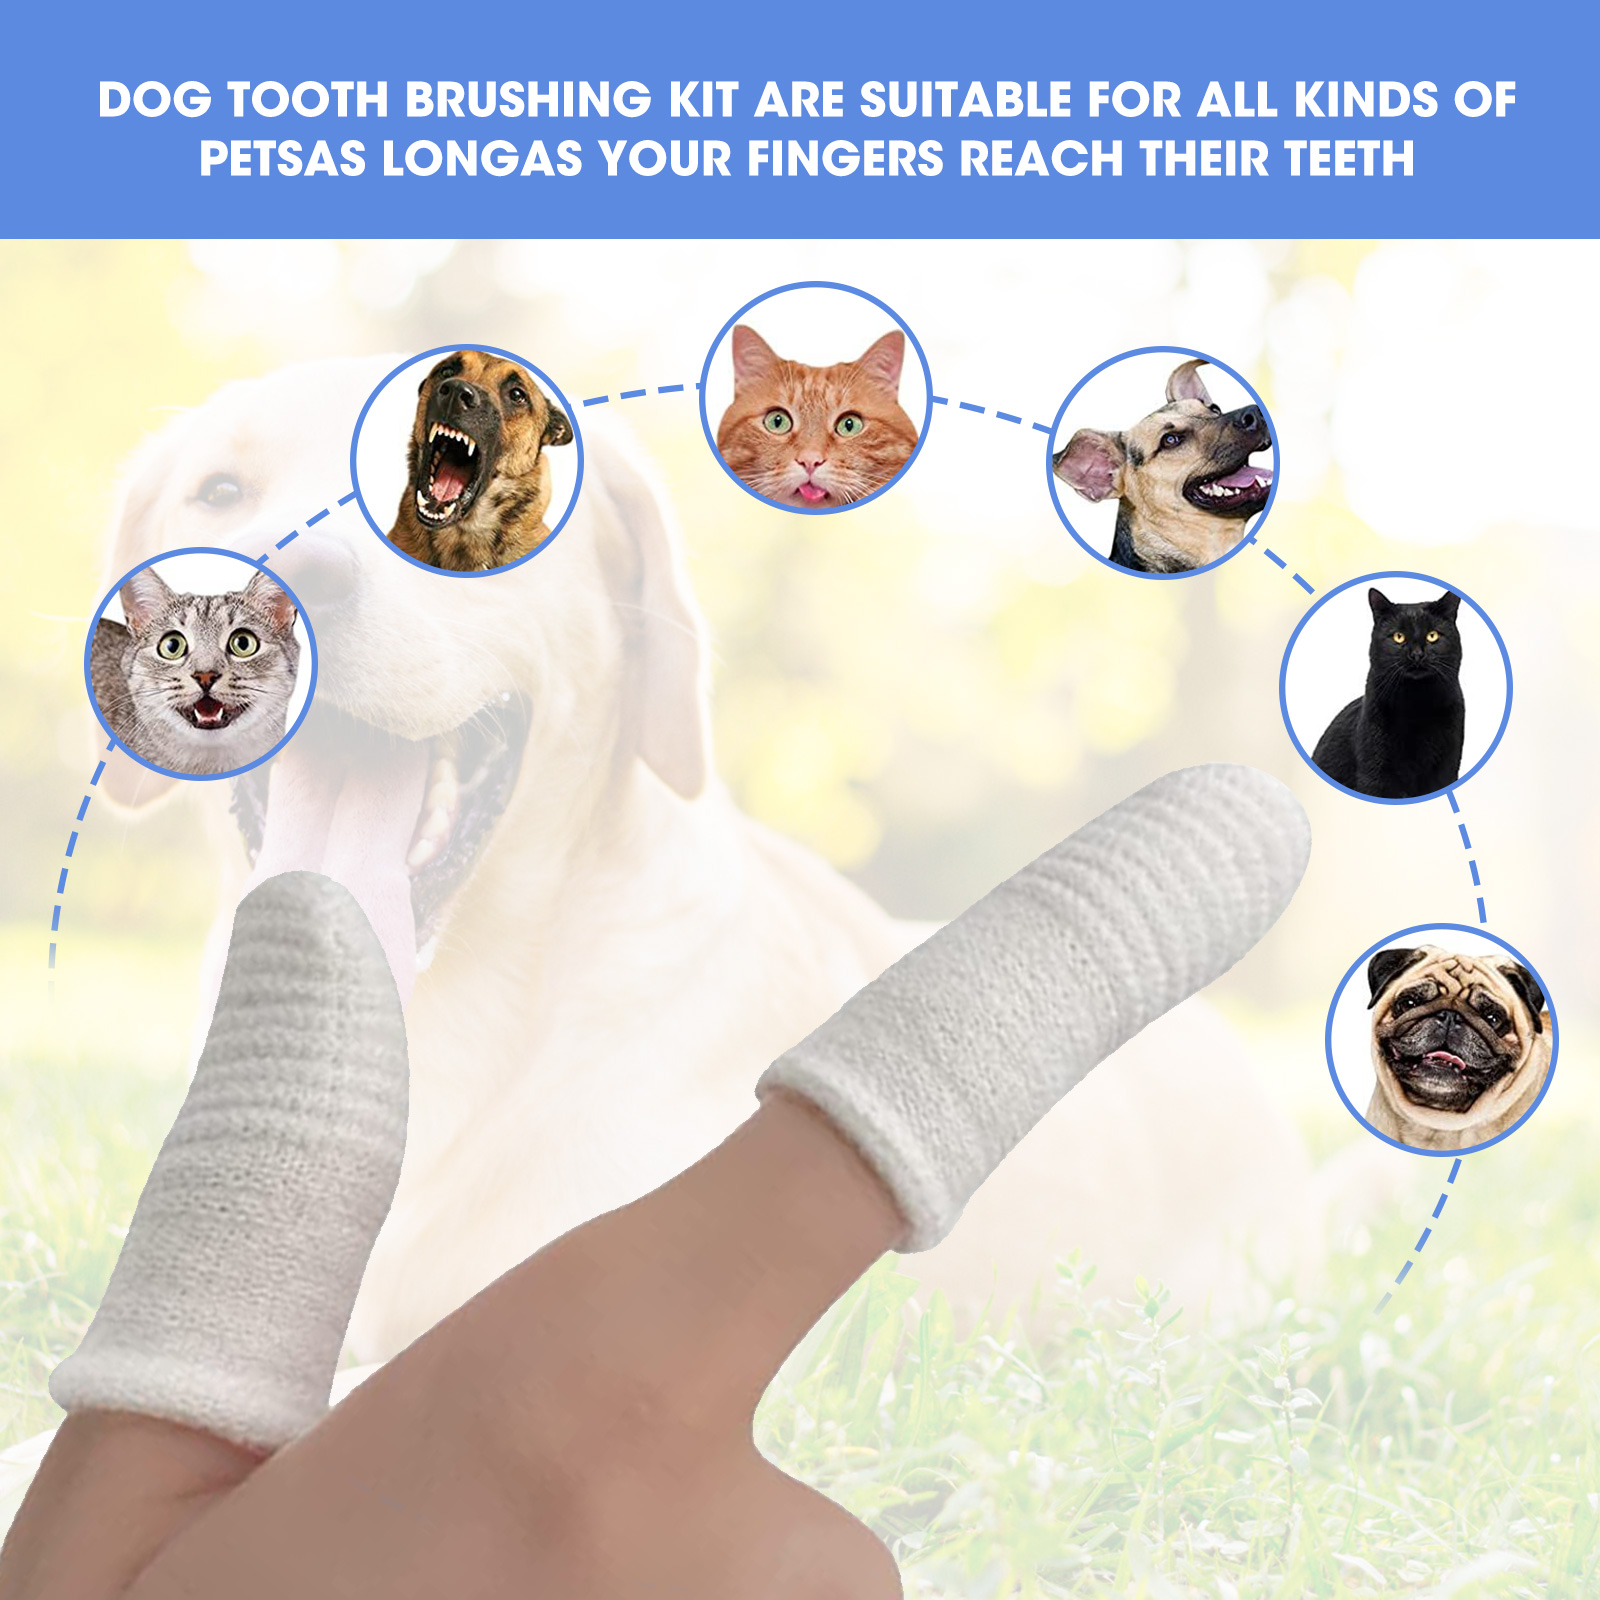 Soft Pet Teeth Brushing Finger Cots | Dog Toothbrush | Oral Cleaning Tool